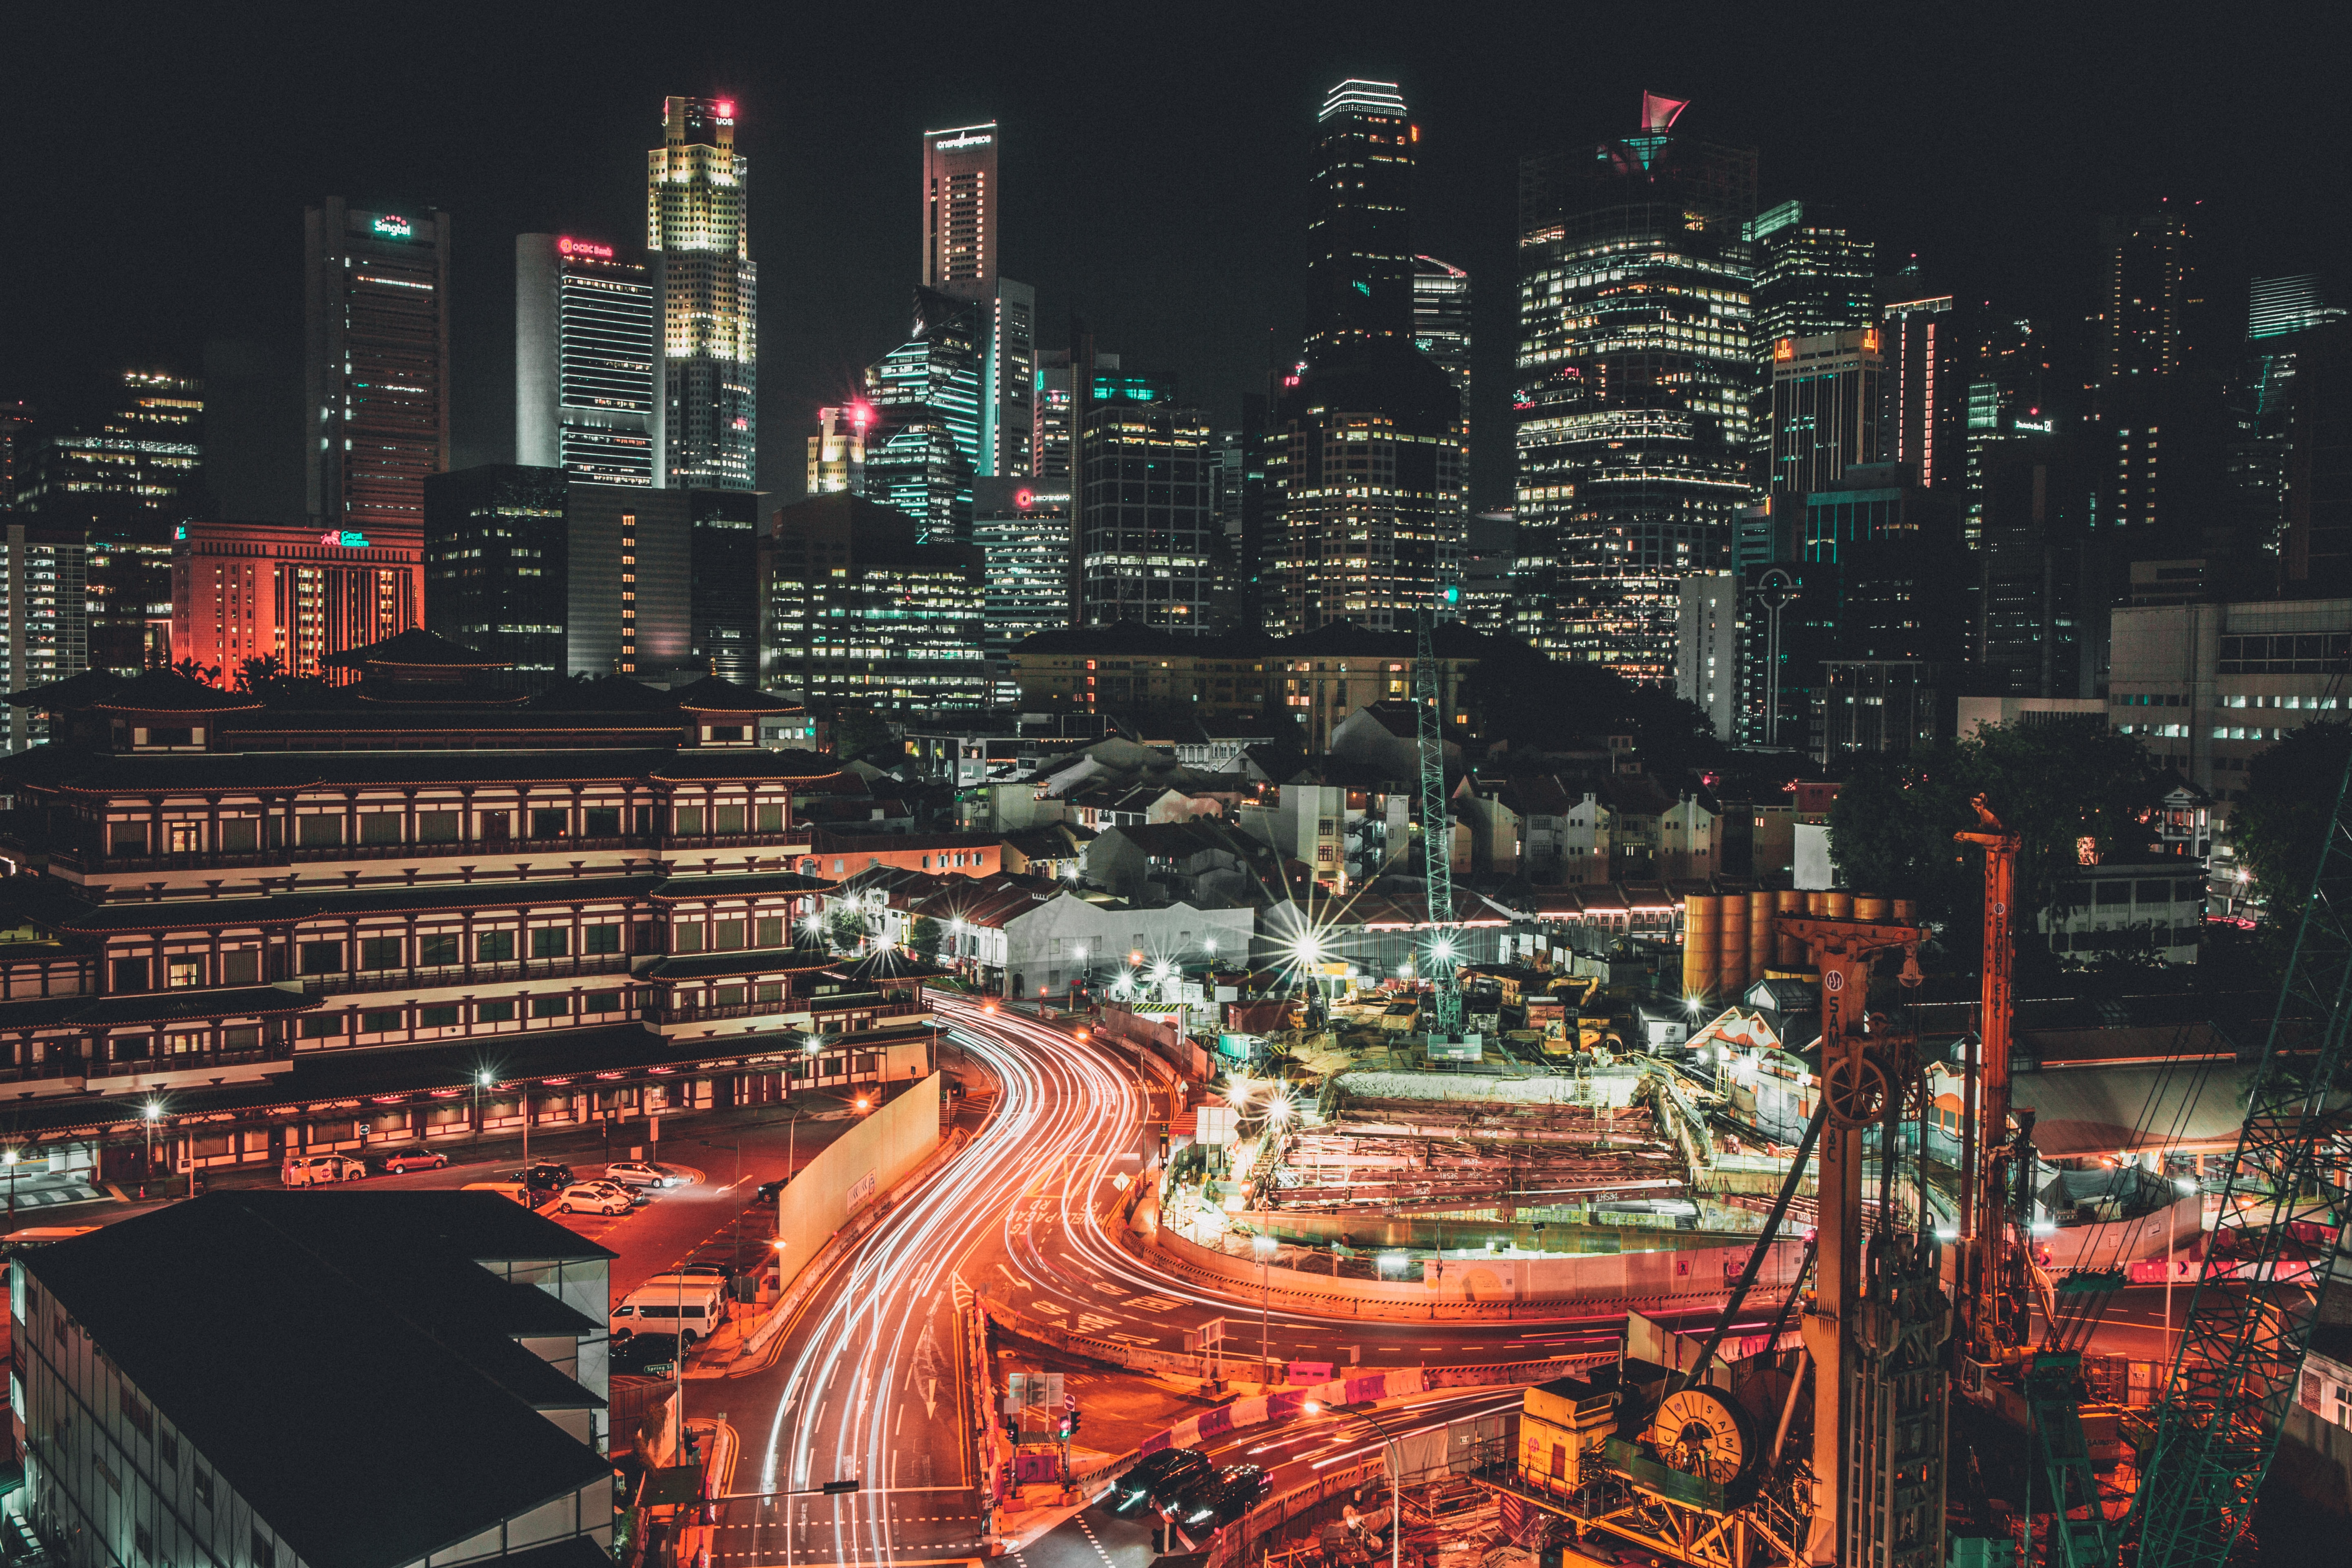 A timelapse of the Singapore city scape at night.